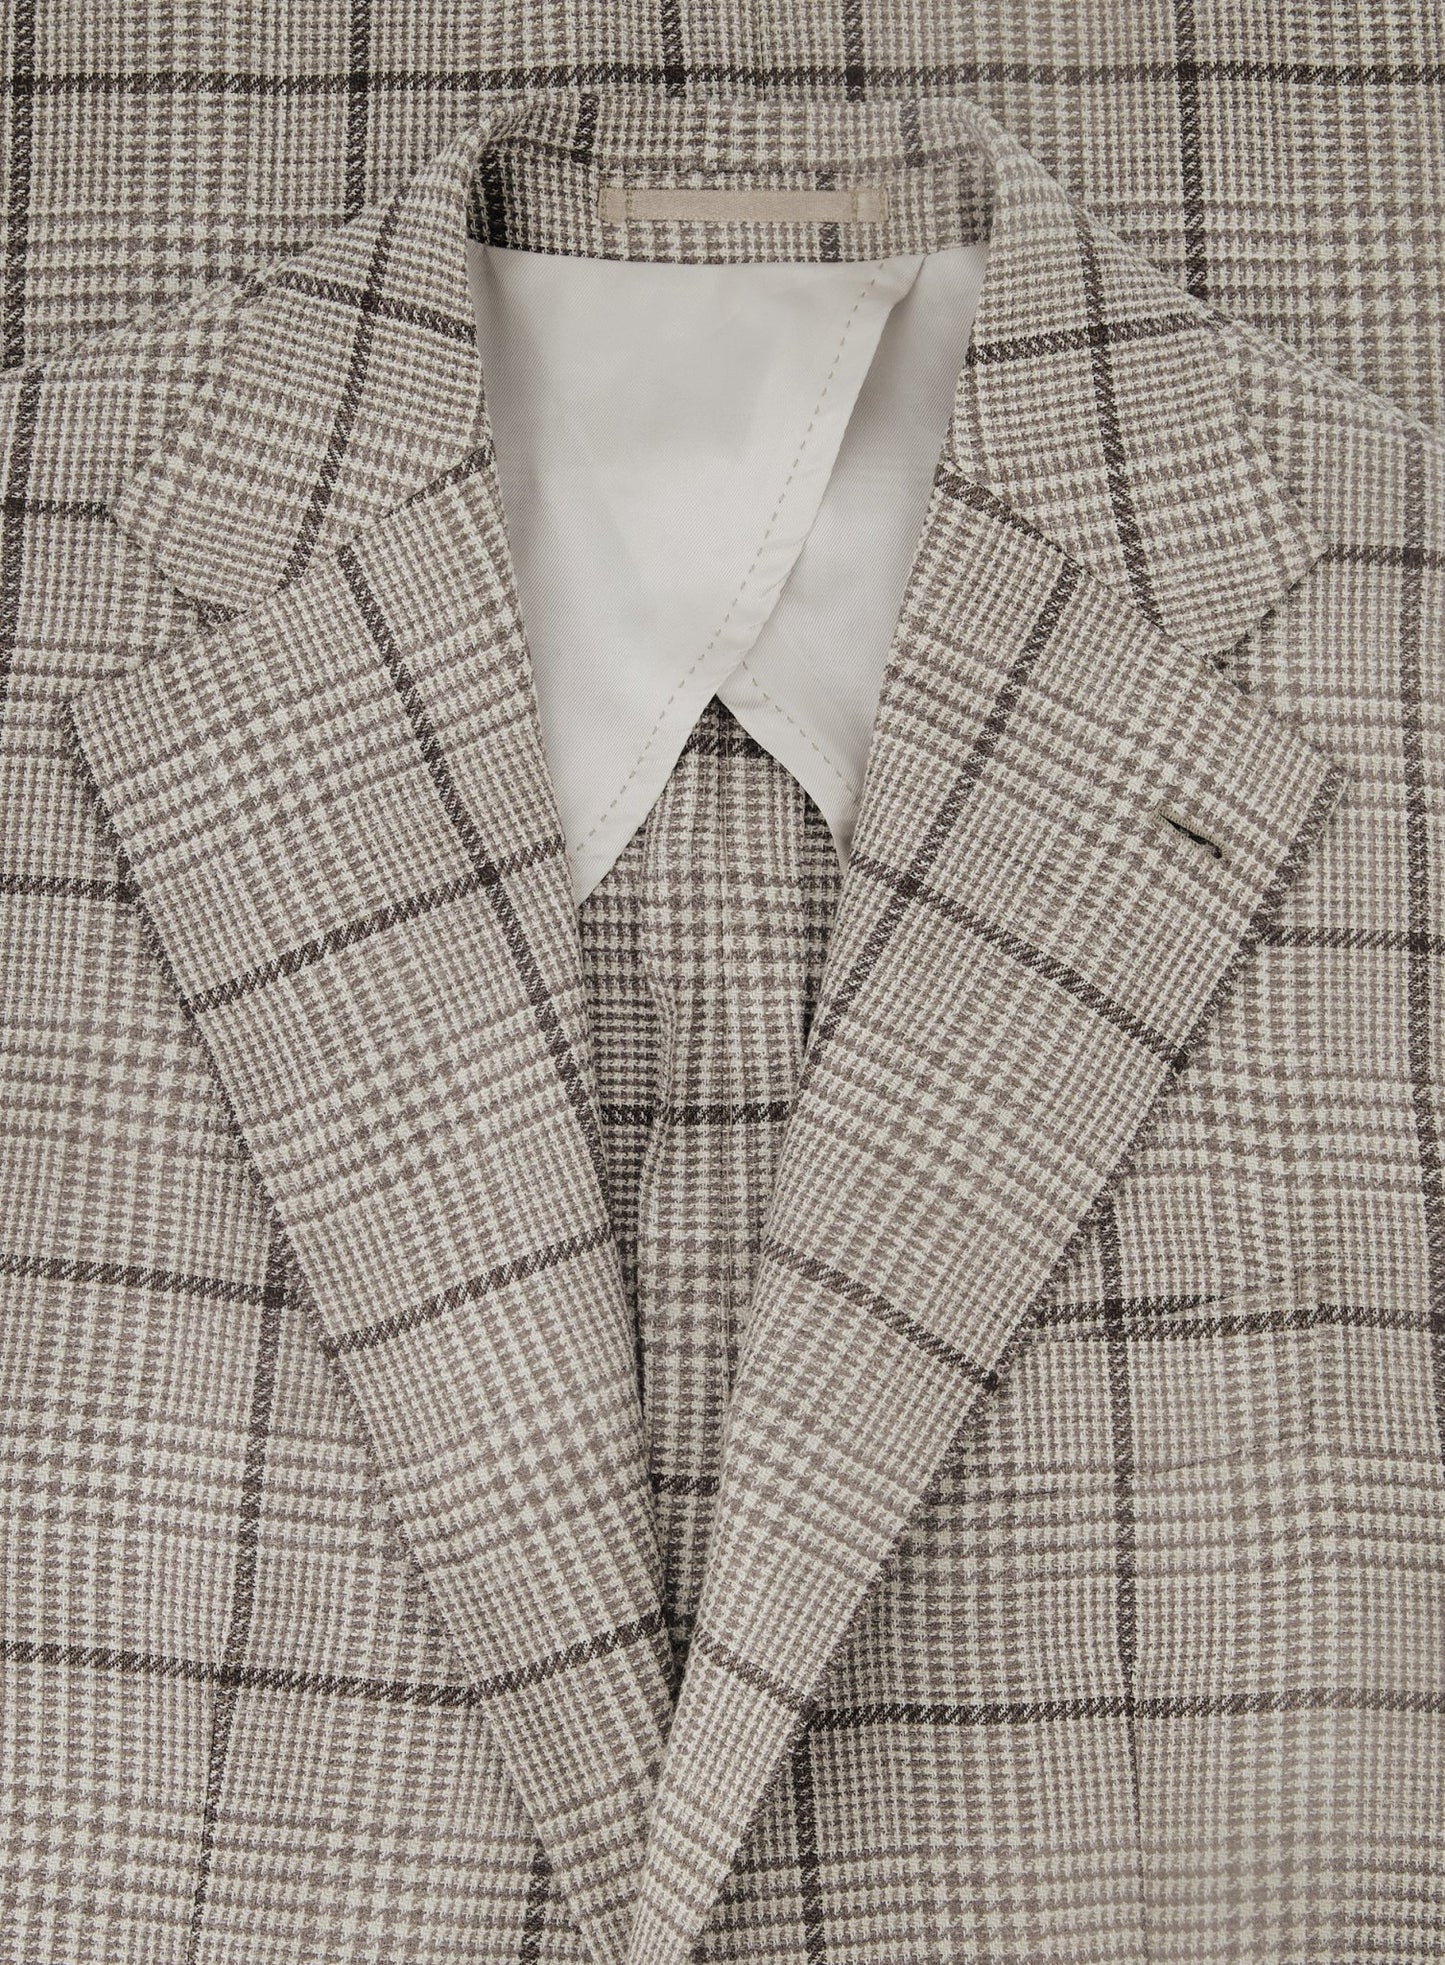 Checked jacket made of wool and silk